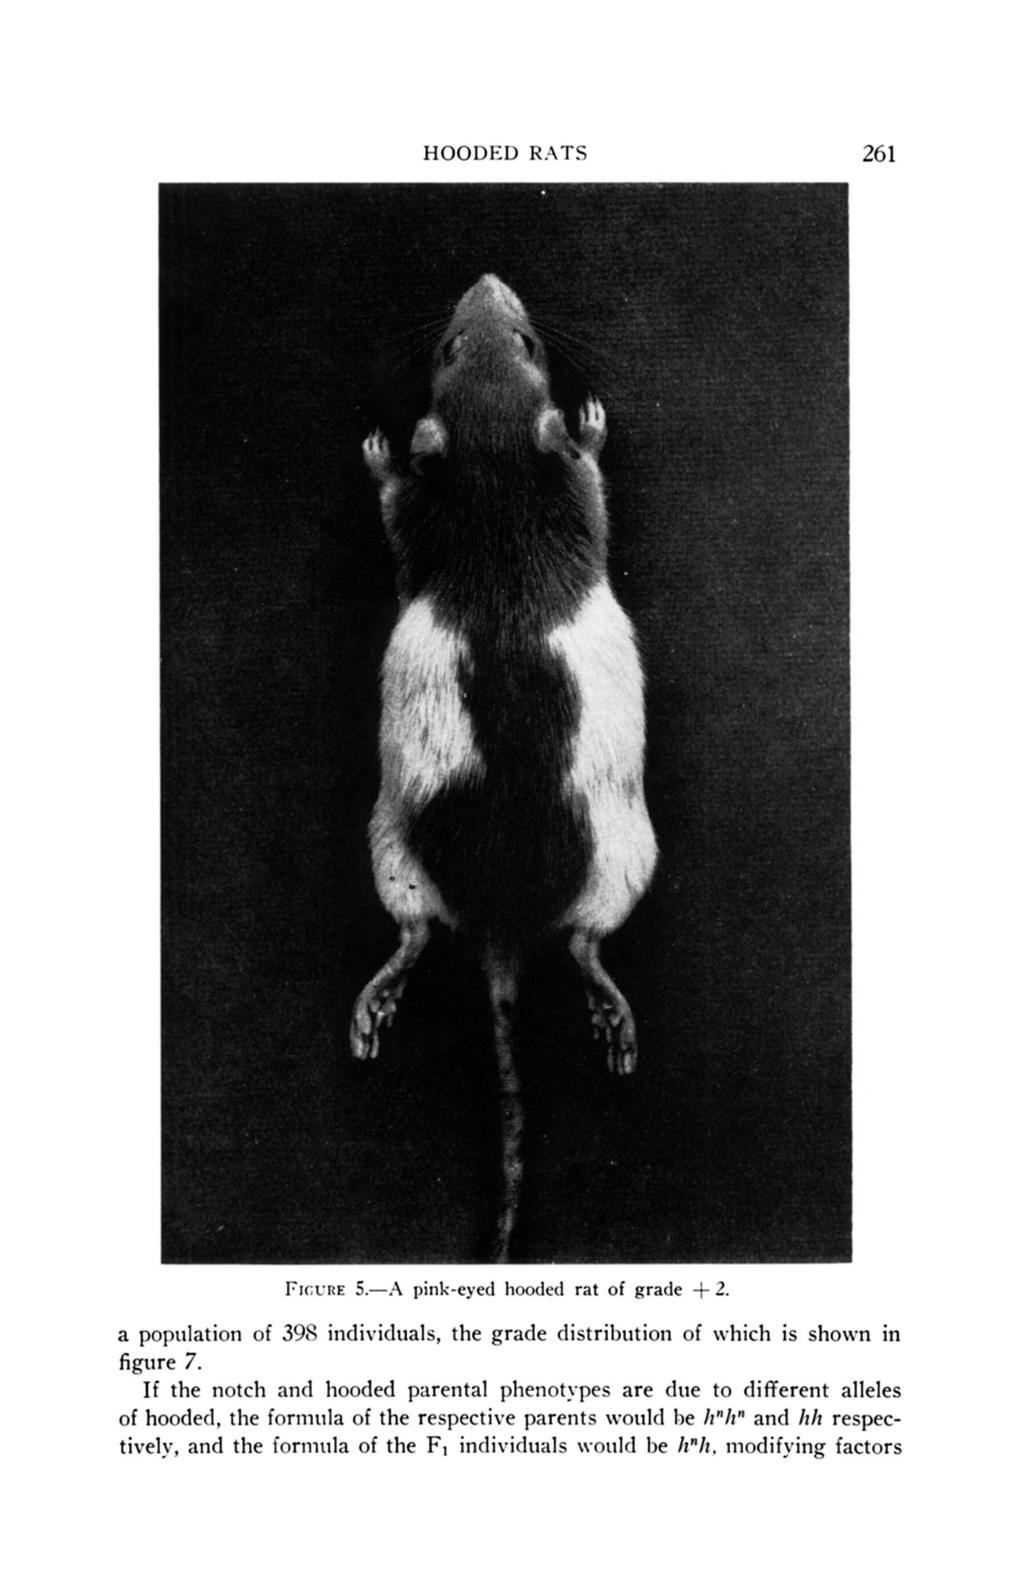 HOODED RATS 26 1 I~rcirrt~ 5.-A pink-eyed liootlecl rat of grade +- 2. a population of 395 individuals, the grade distribution of which is shown in figure 7.